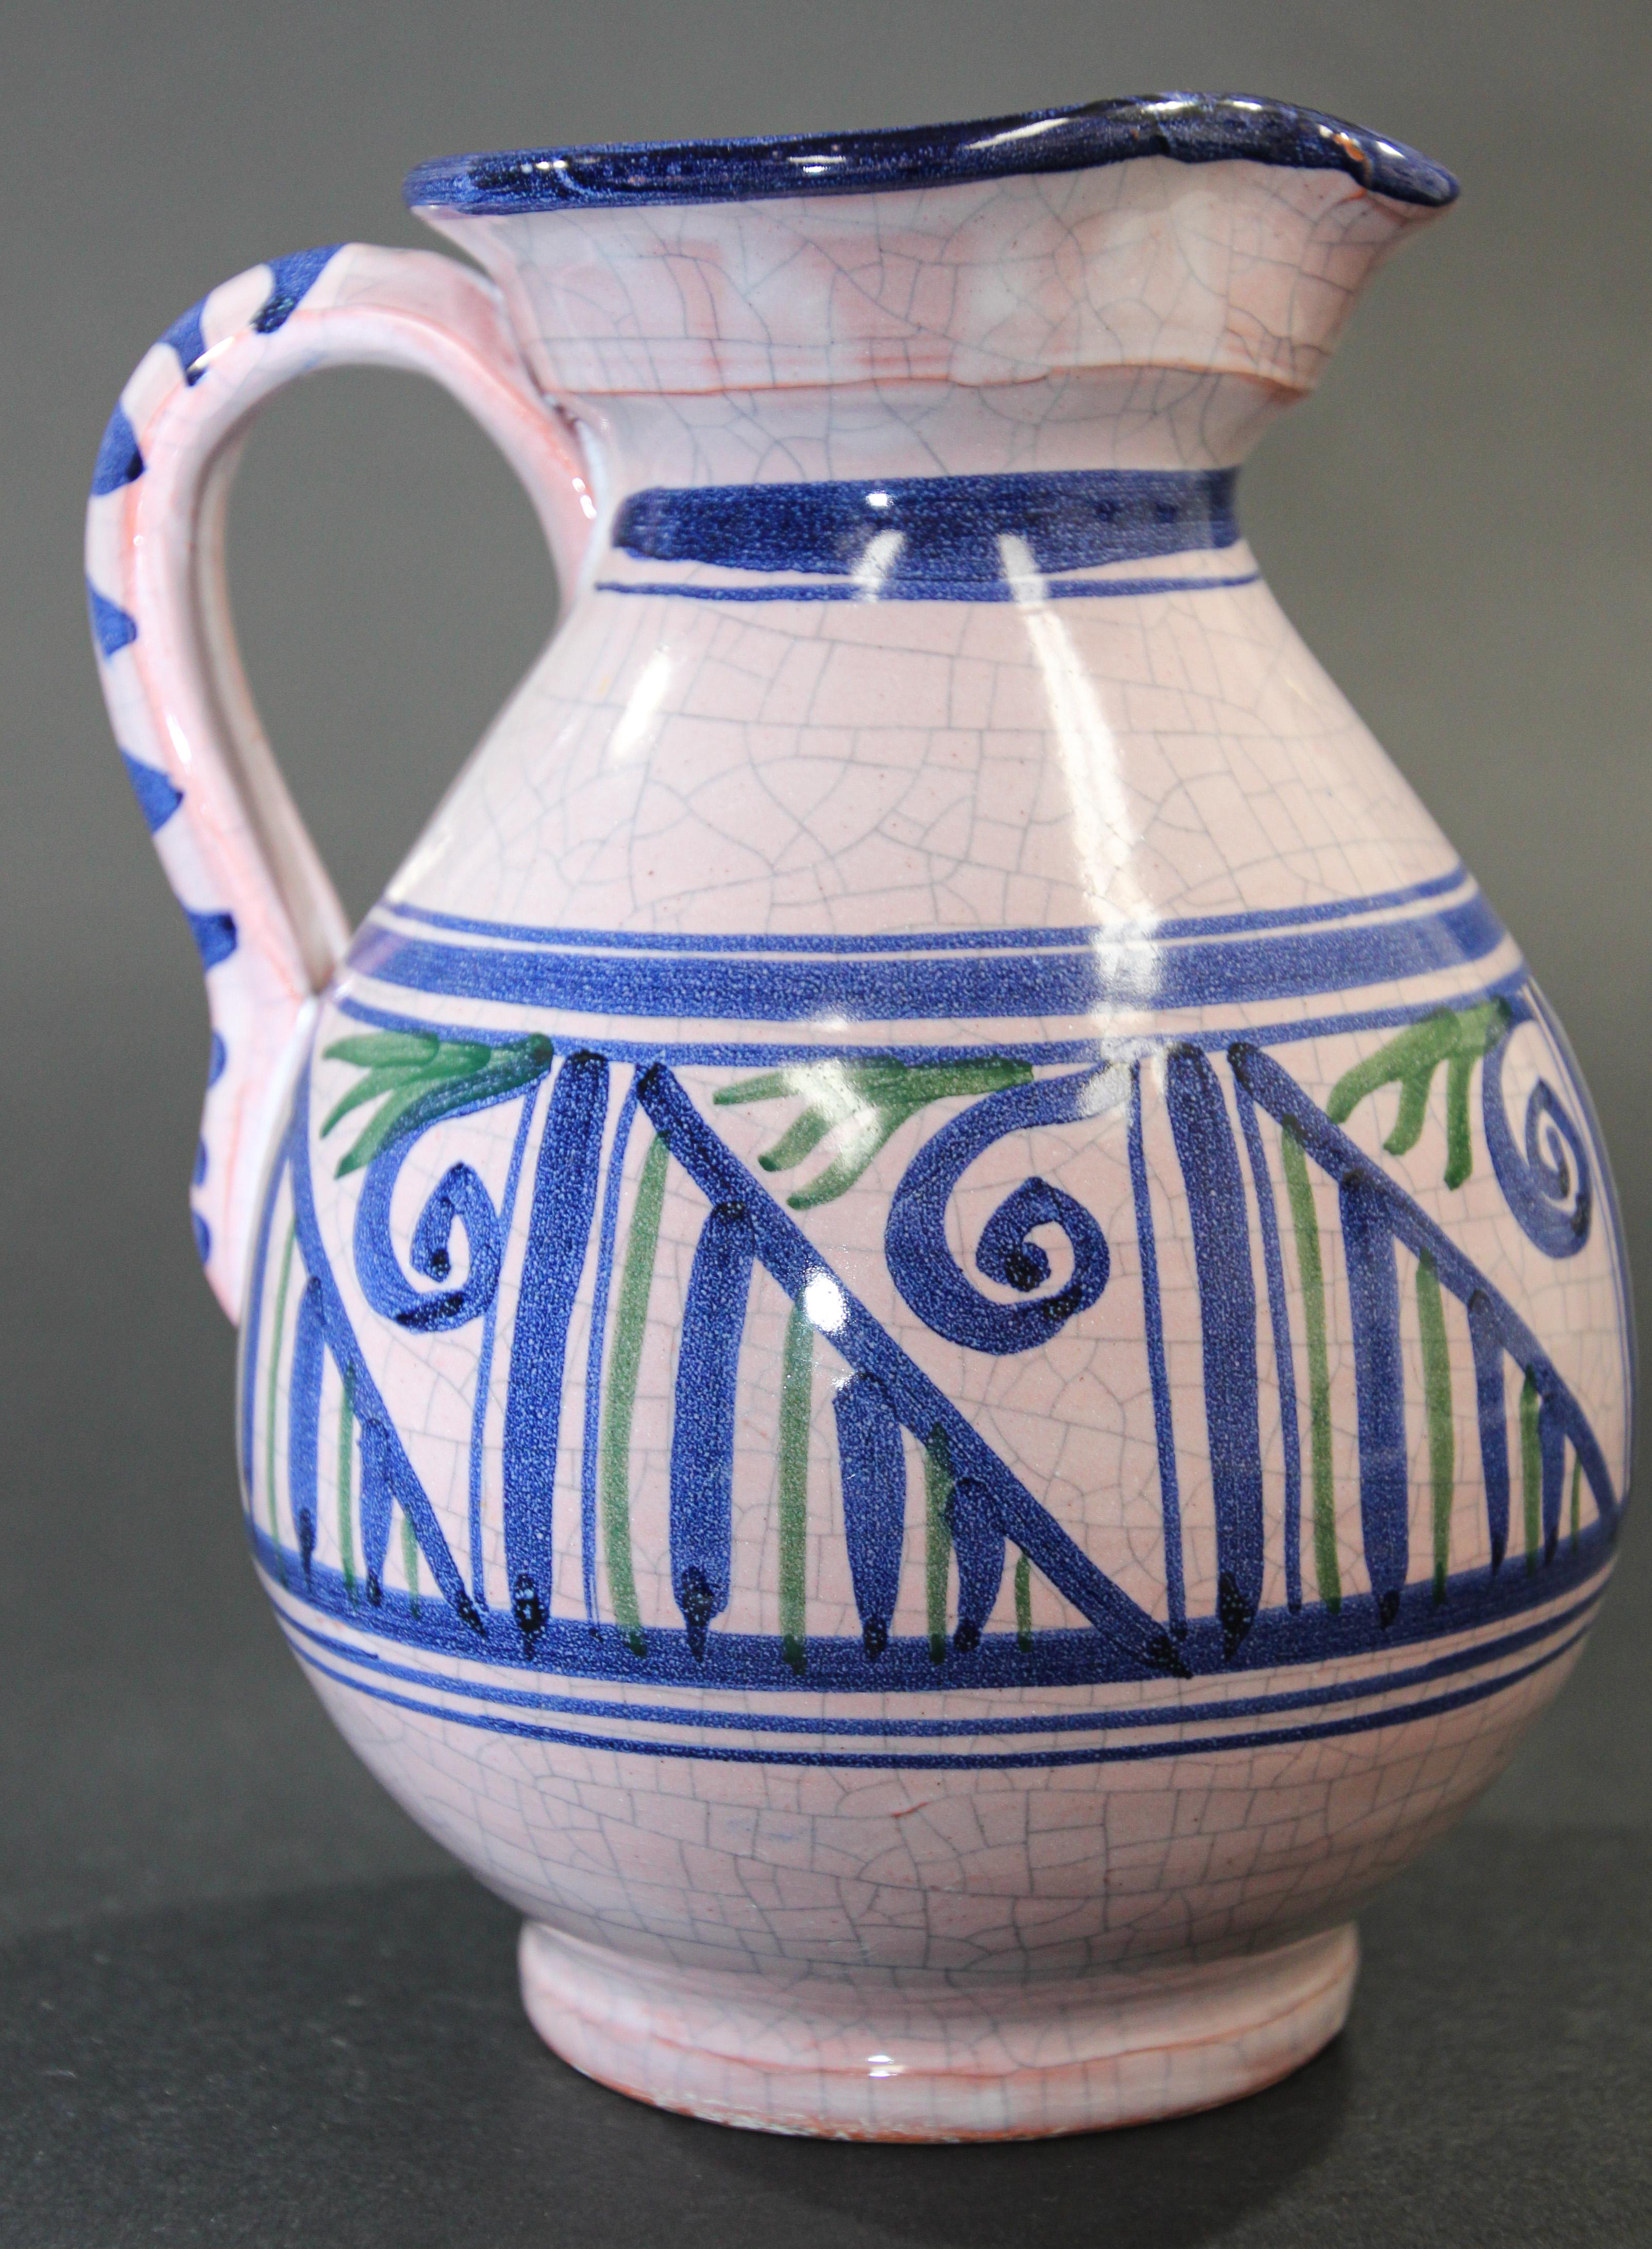 20th Century Talavera Pitcher Ceramic Glazed Vase Handcrafted in Spain For Sale